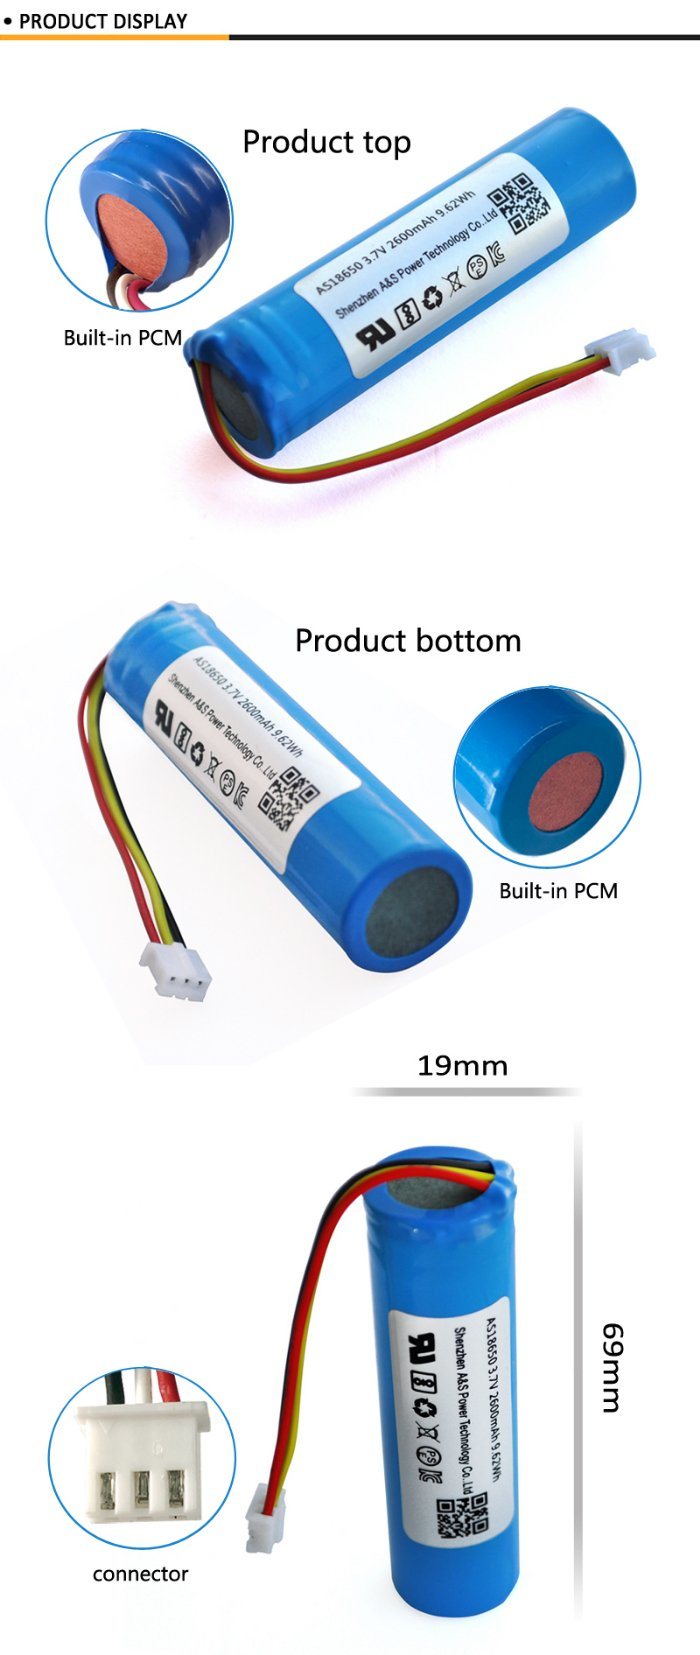 Wholesale Factory Price Li Ion Battery 3.7V 2600mAh 18650 Lithium Ion Battery for Flashlight